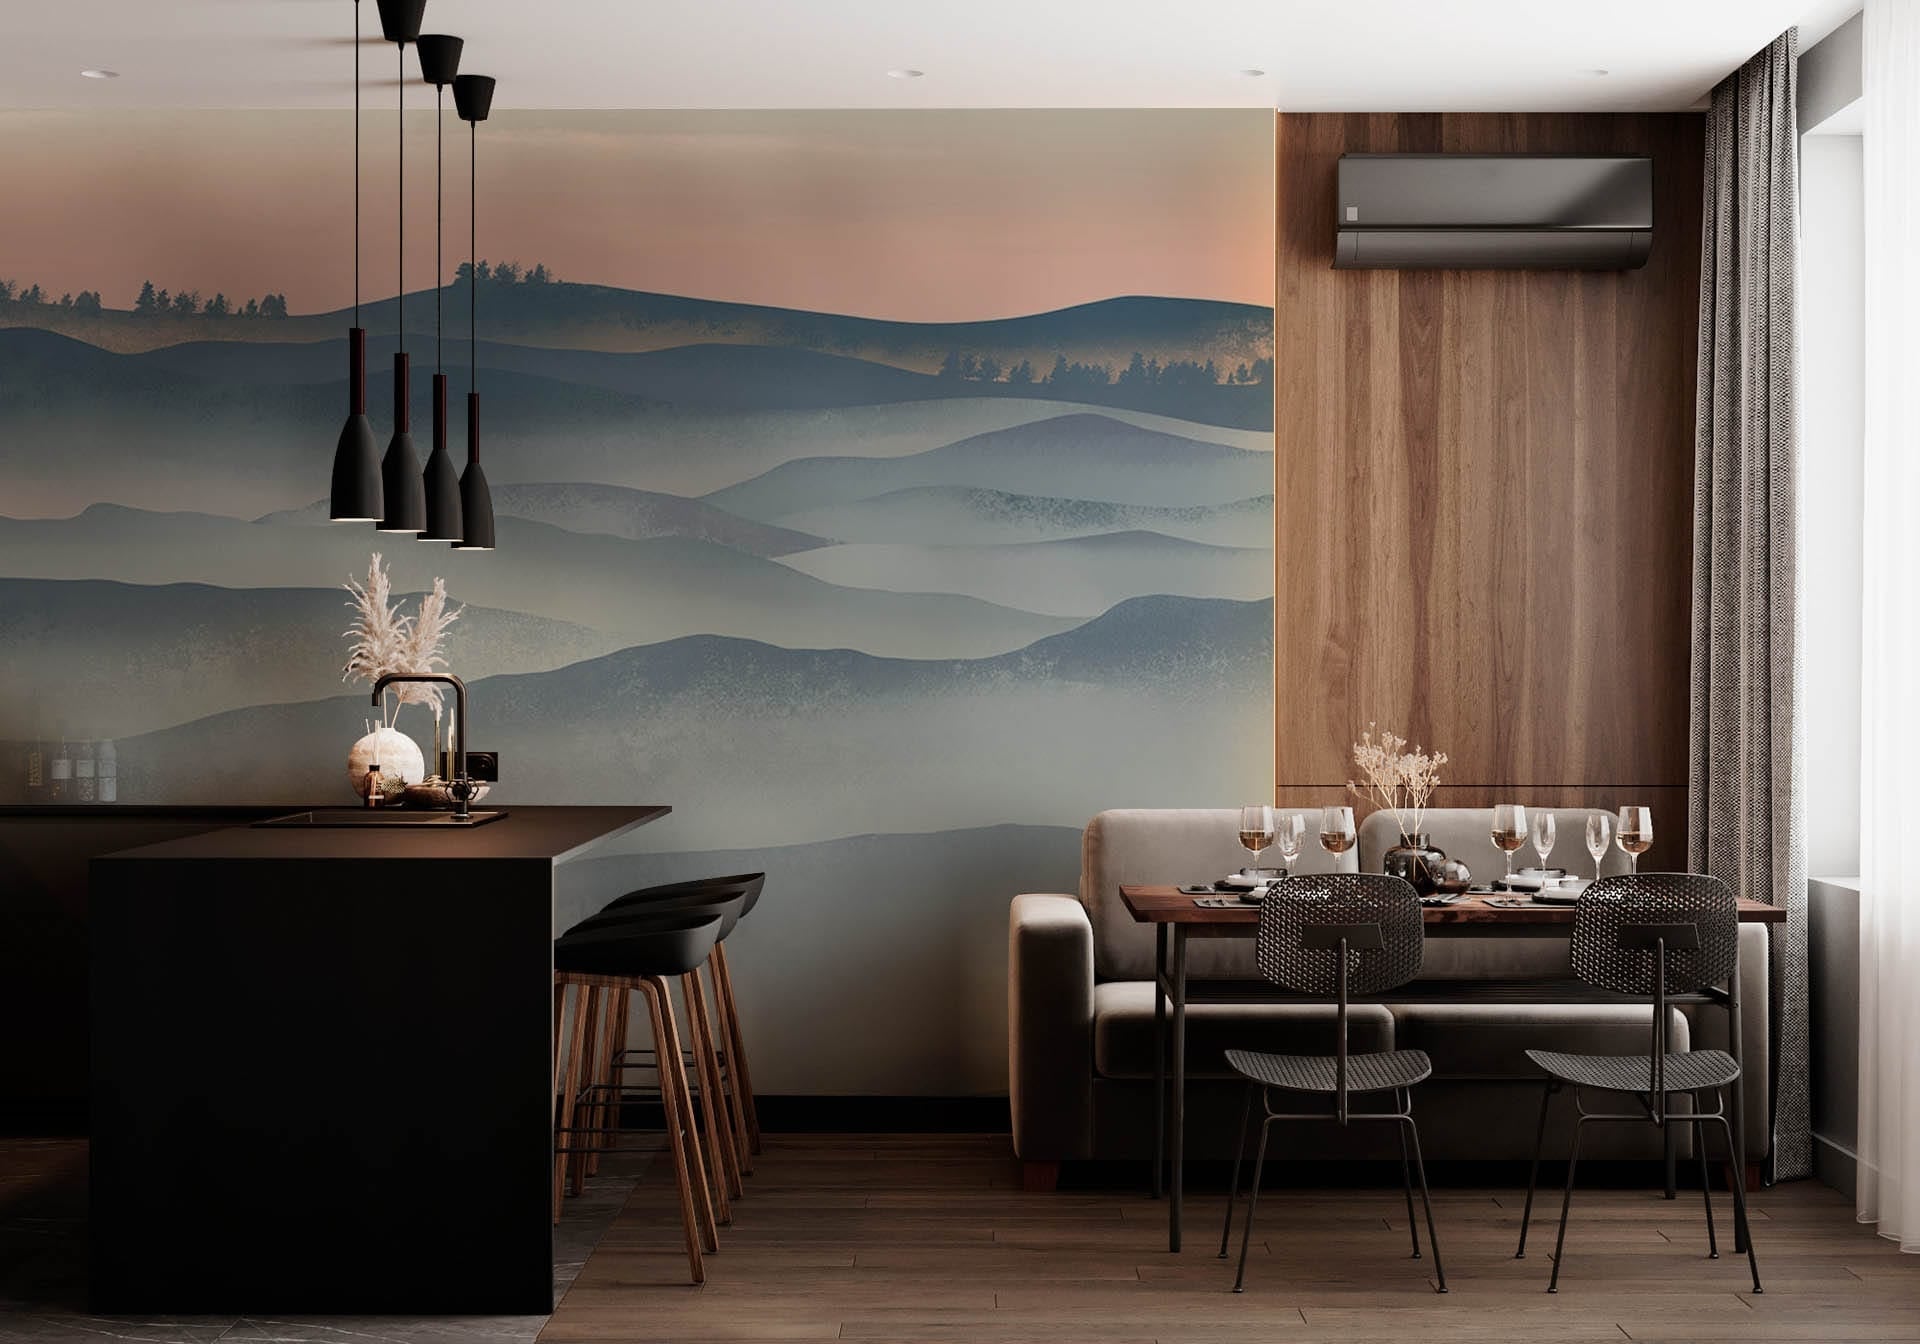 Wallpaper with a Landscape of Mountains and Hills for the Dining Room